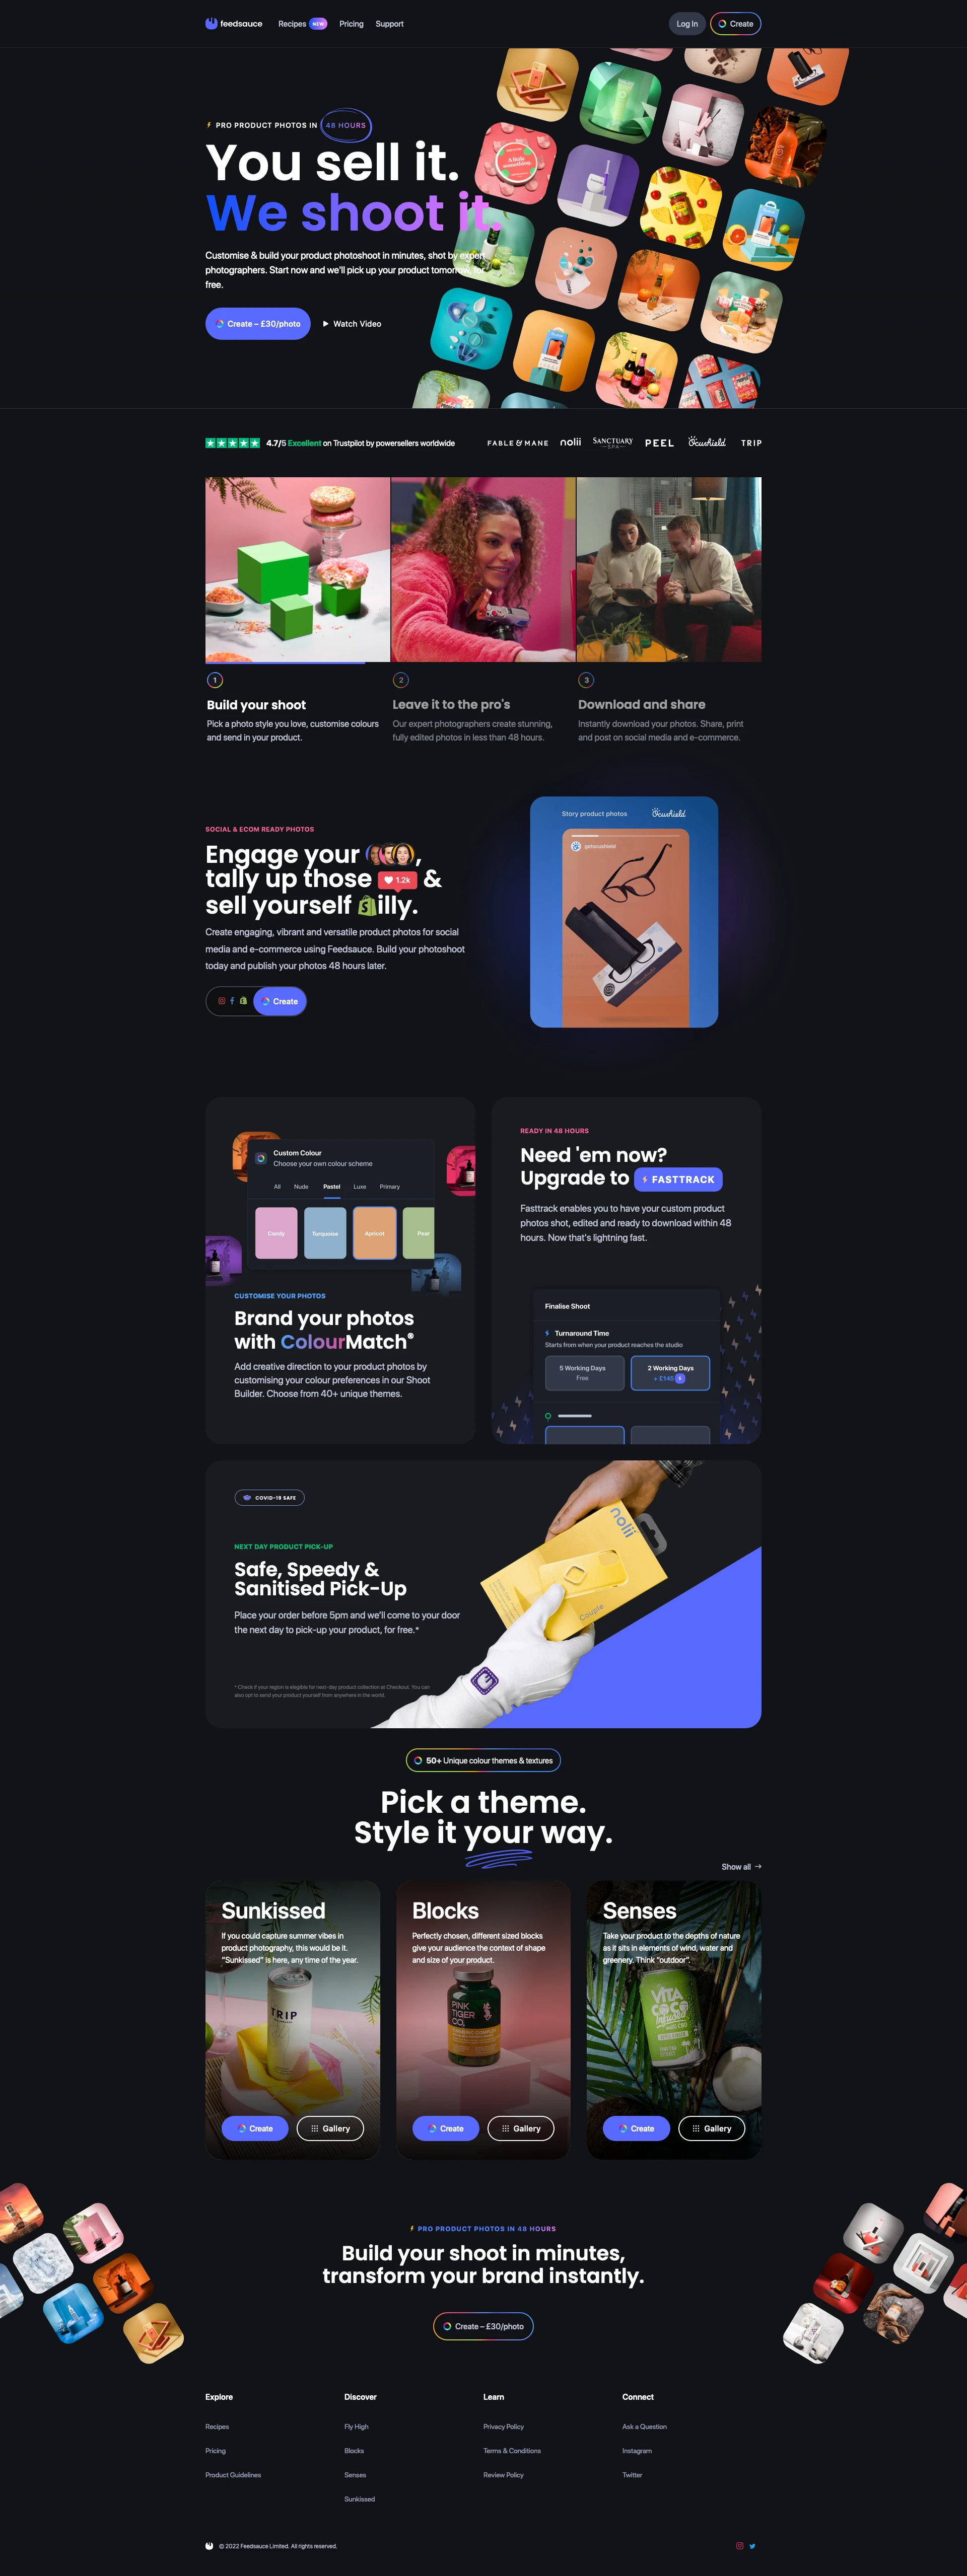 Feedsauce Landing Page Example: Customise and build your product photoshoot in a few clicks. Shopify & Instagram ready photos in 48 hours and we’ll pick up your product tomorrow, for free.